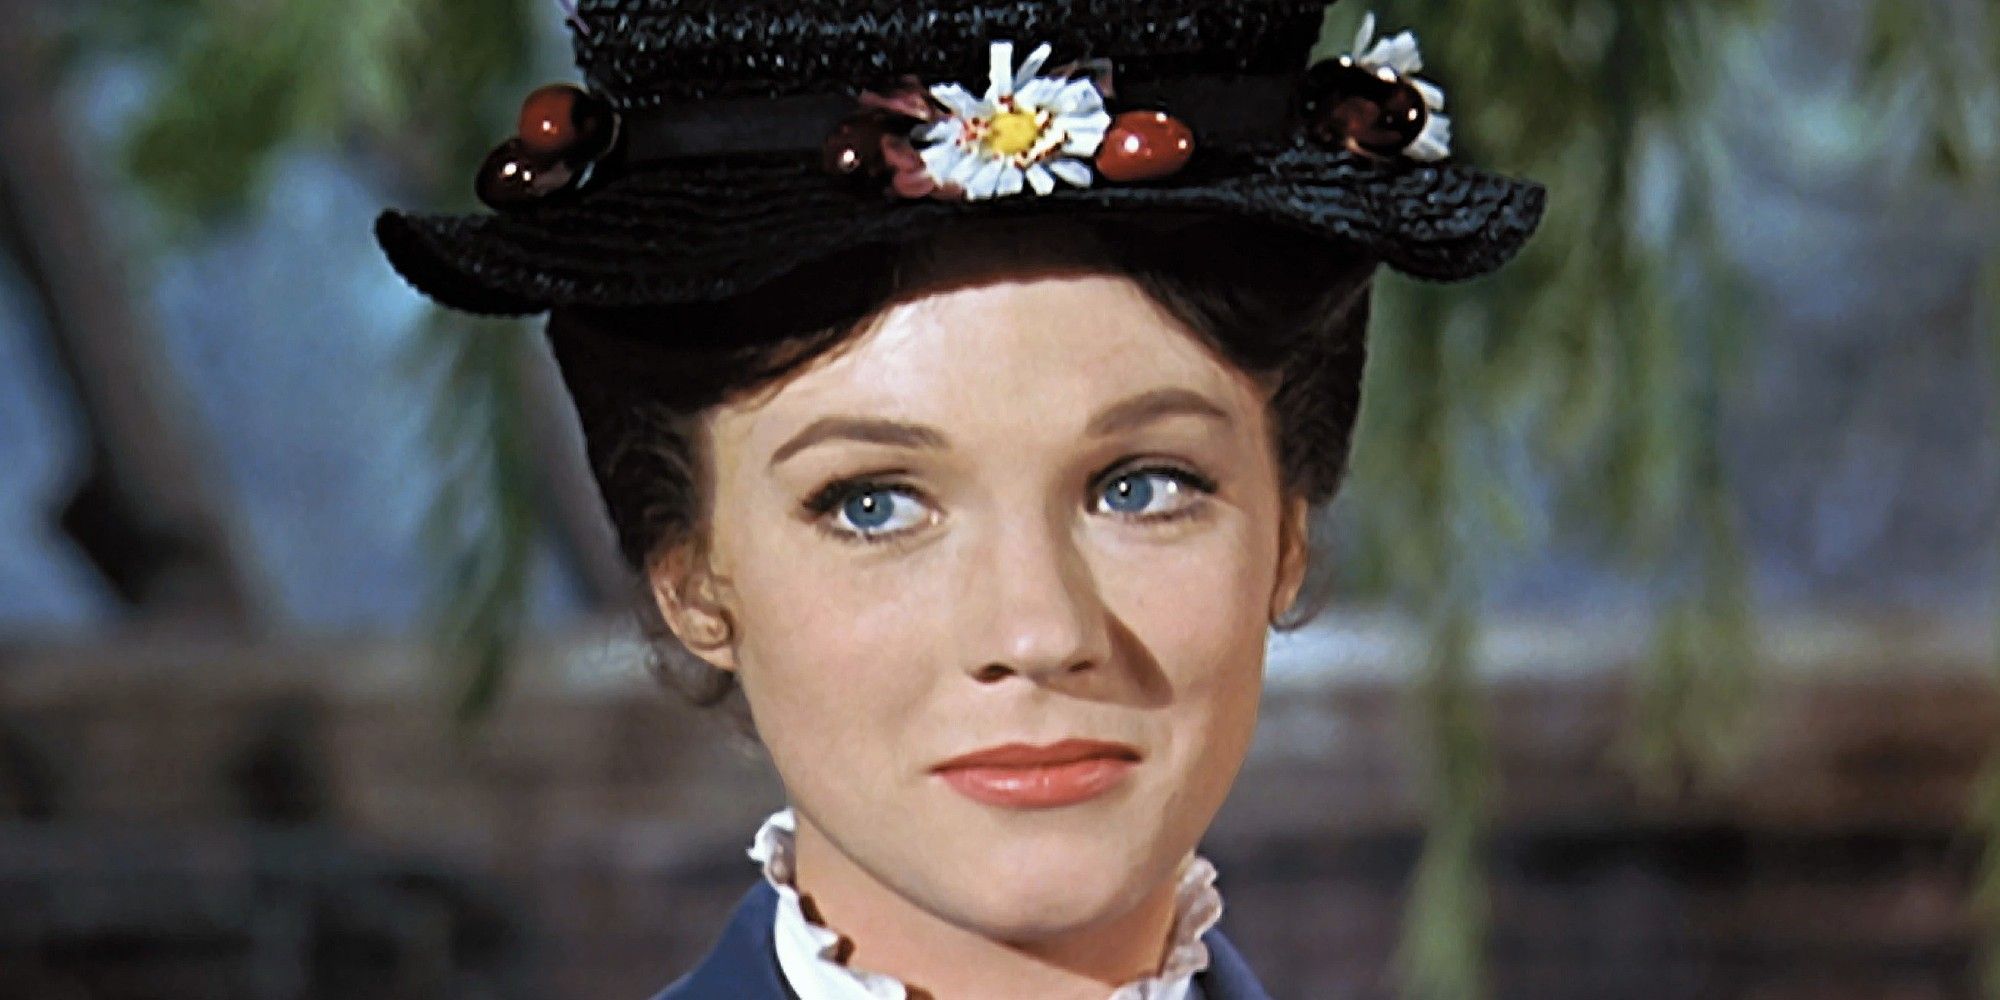 Mary Poppins smiling softly in 'Mary Poppins'